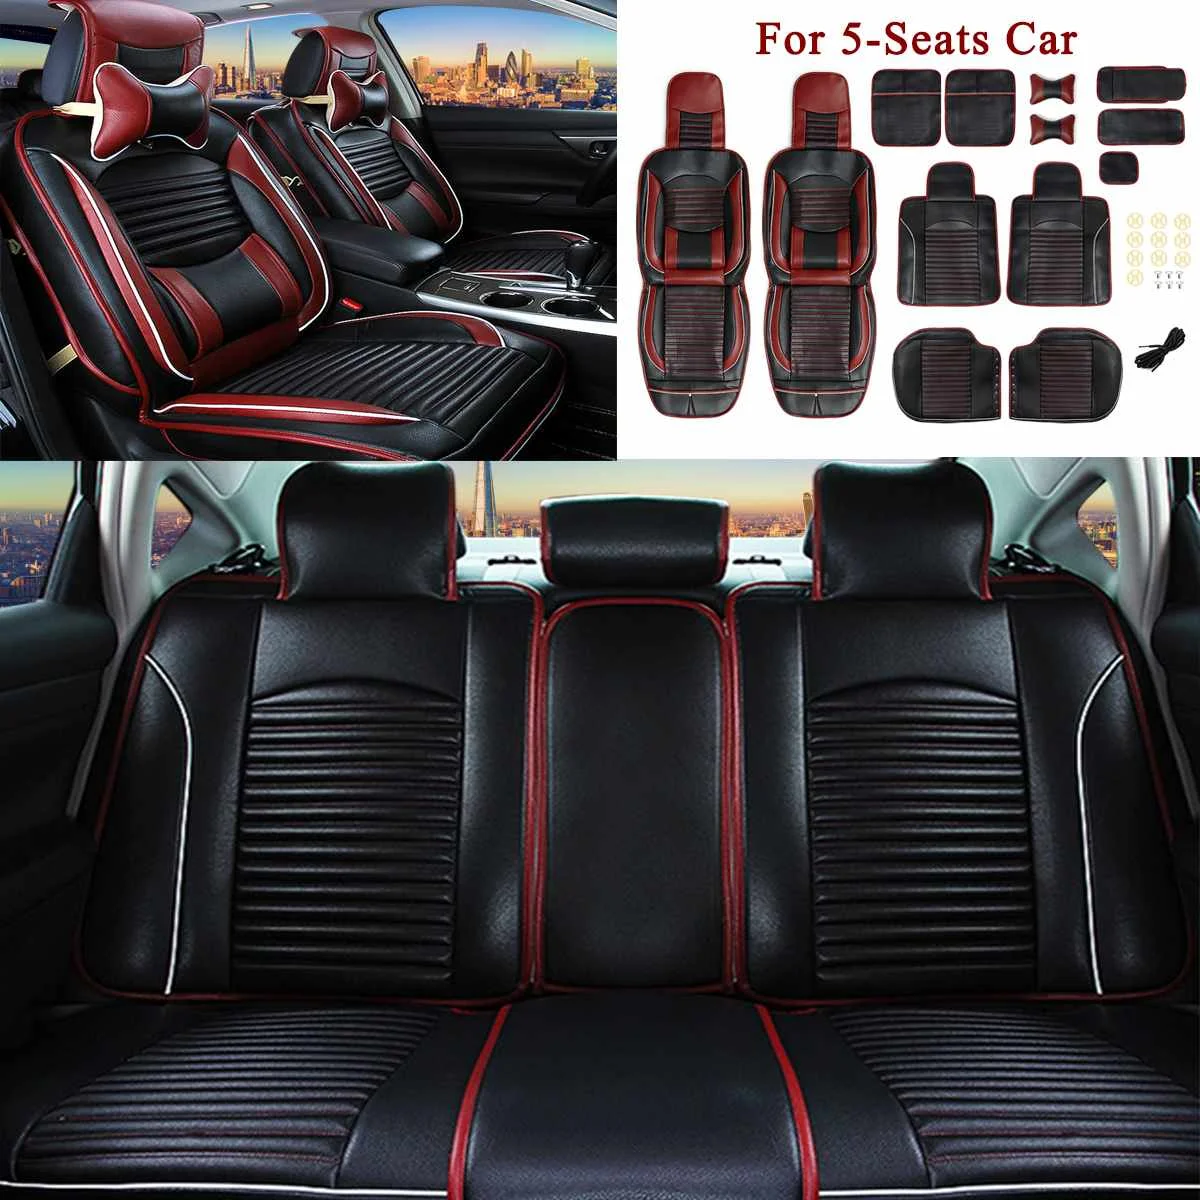 

For 5 Seat Car Luxury Black PU Leather Full Surround Car Seat Cover Cushion Front Rear Set Car Styling Auto Seat Protector Case